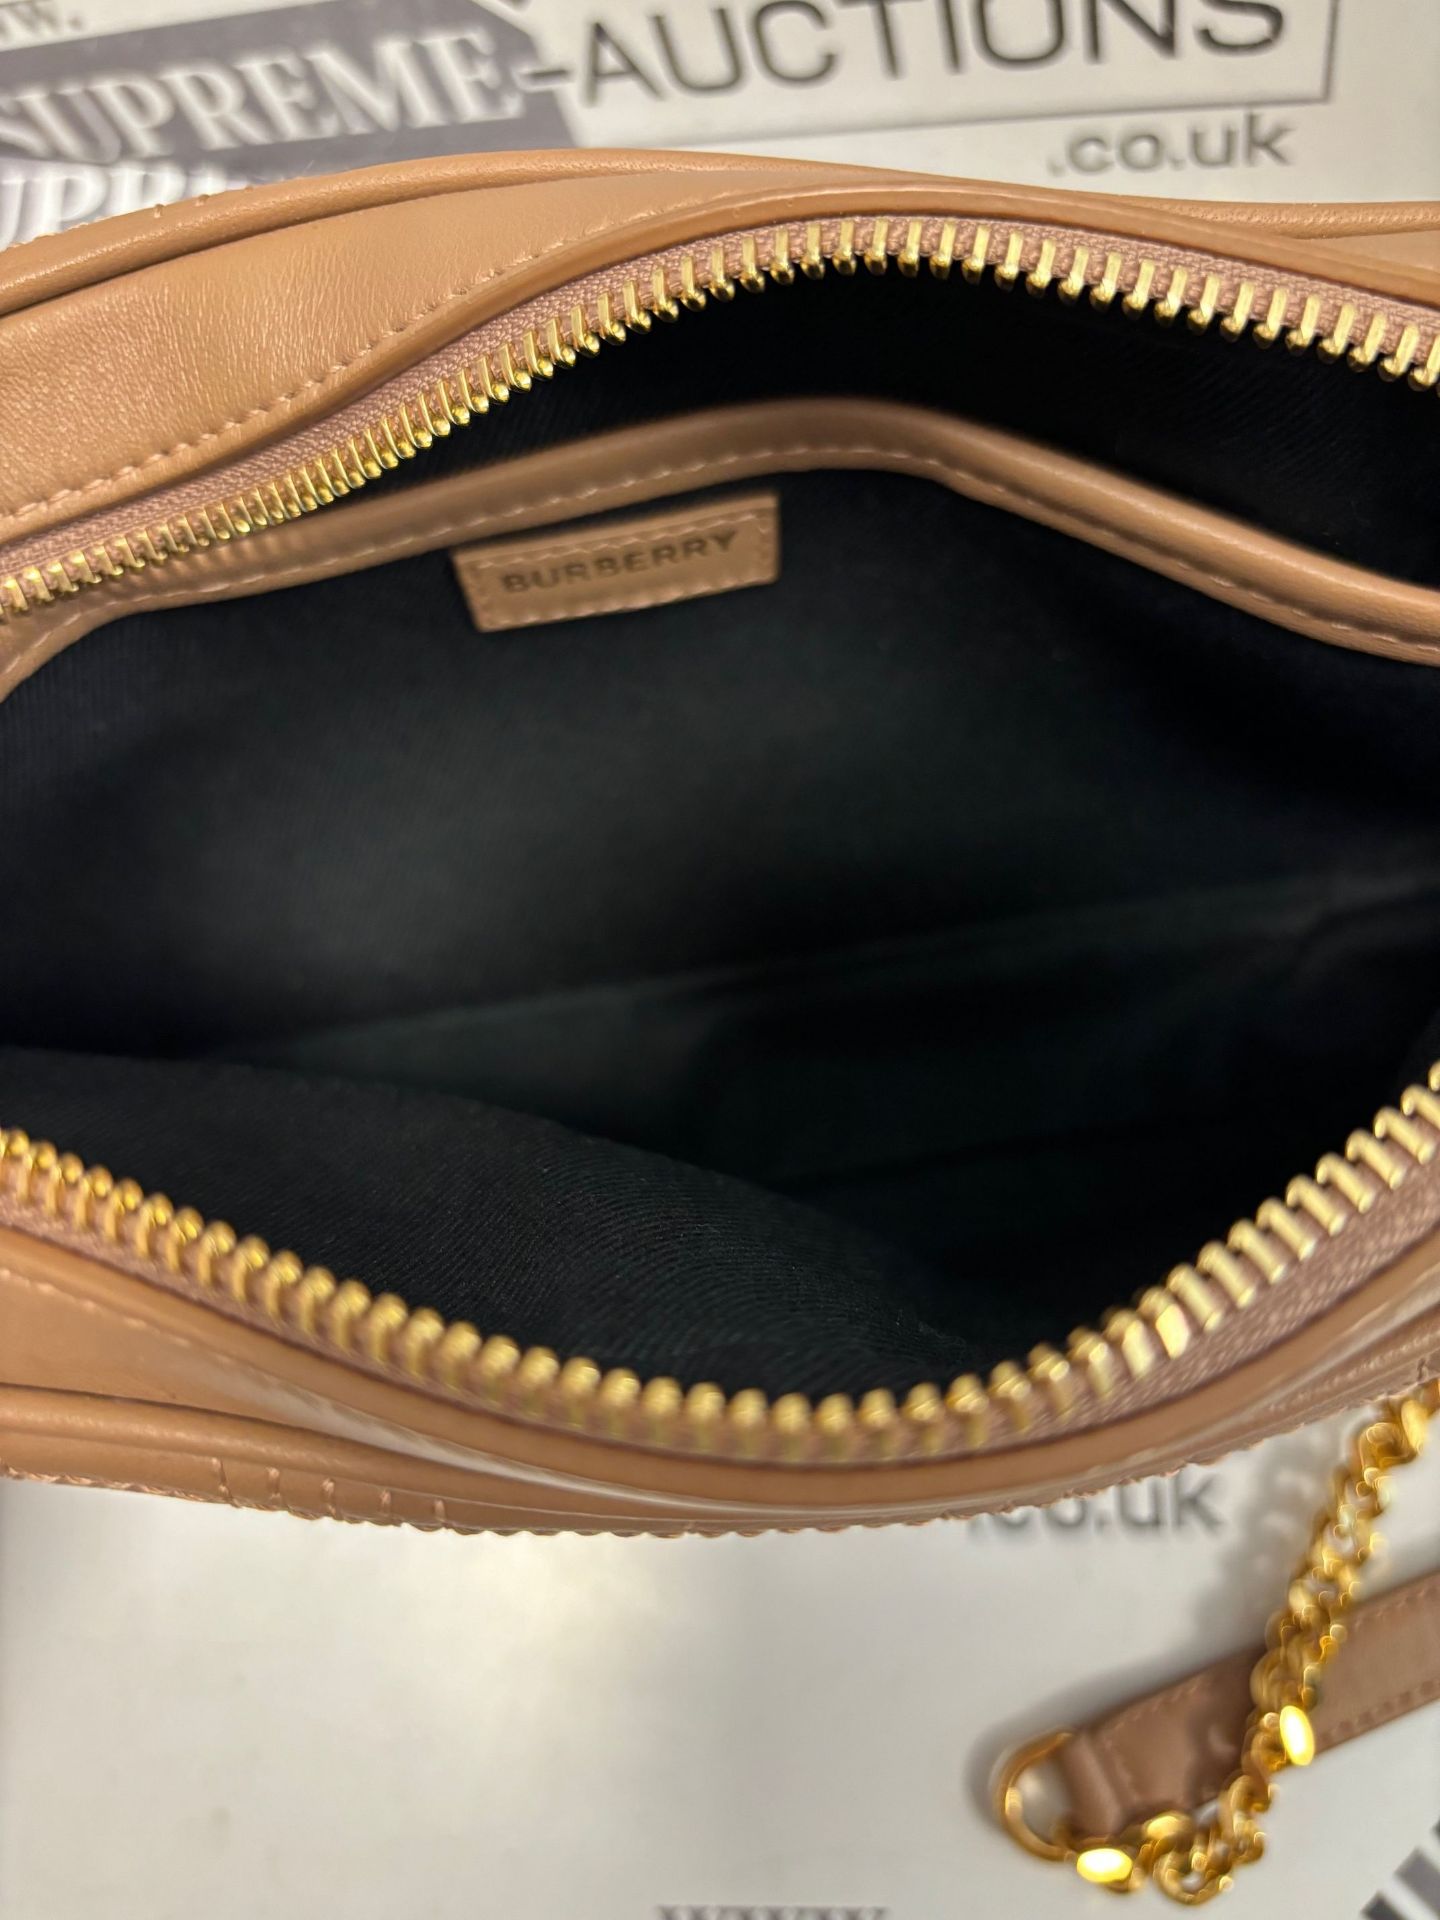 (No Vat) Burberry tb soft crossbody bag camel with Gold. Approx 23x12cm. - Image 7 of 7